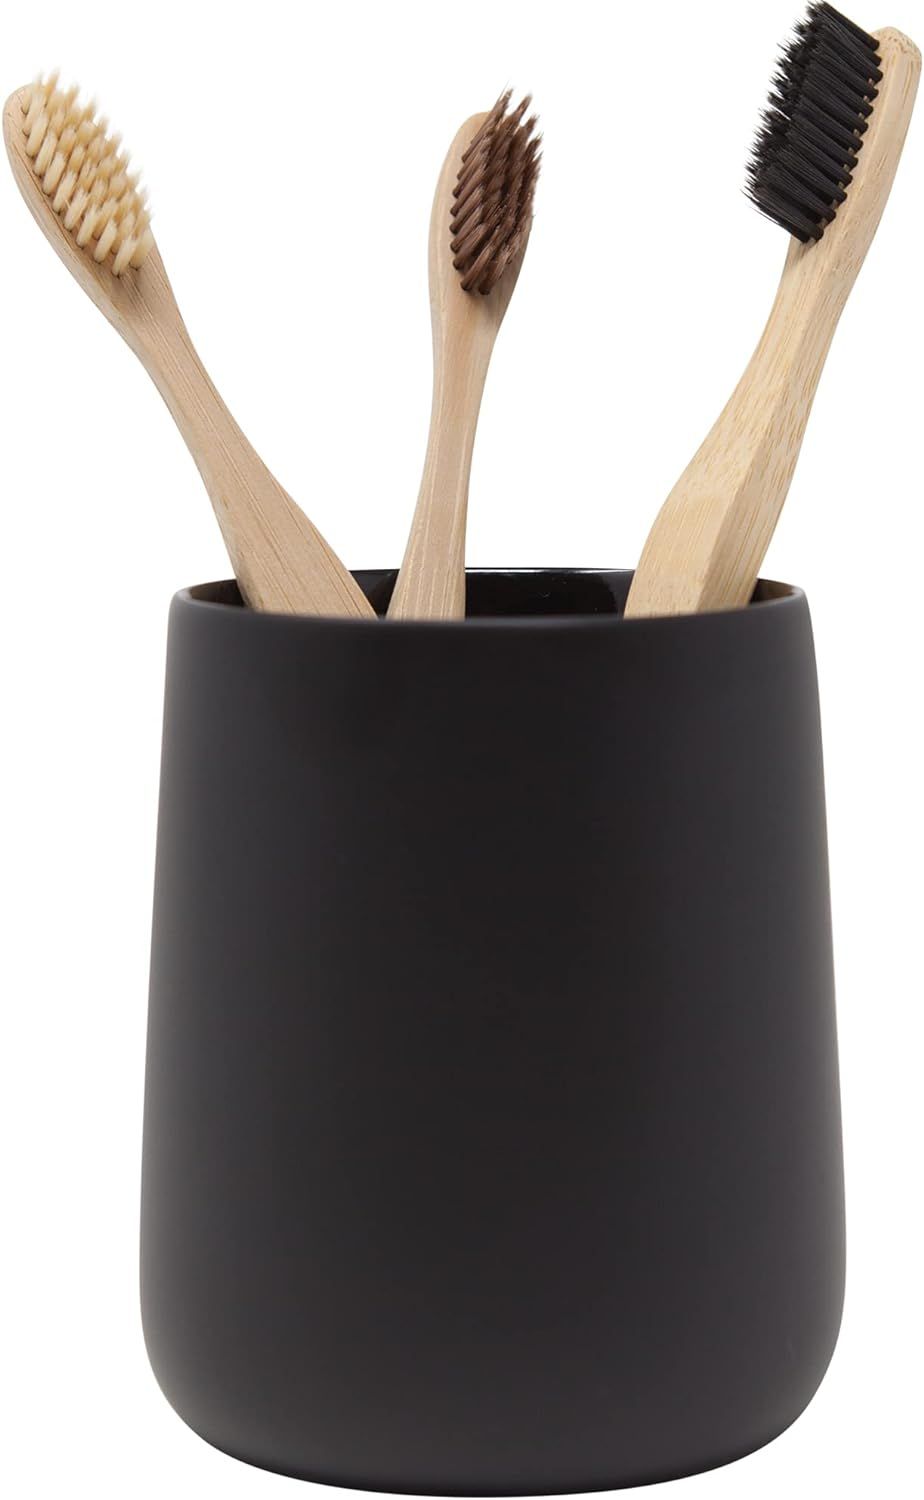 Yew Design - Matte Black Toothbrush Holder for Bathroom - Toothpaste Holder and Cup | Amazon (US)